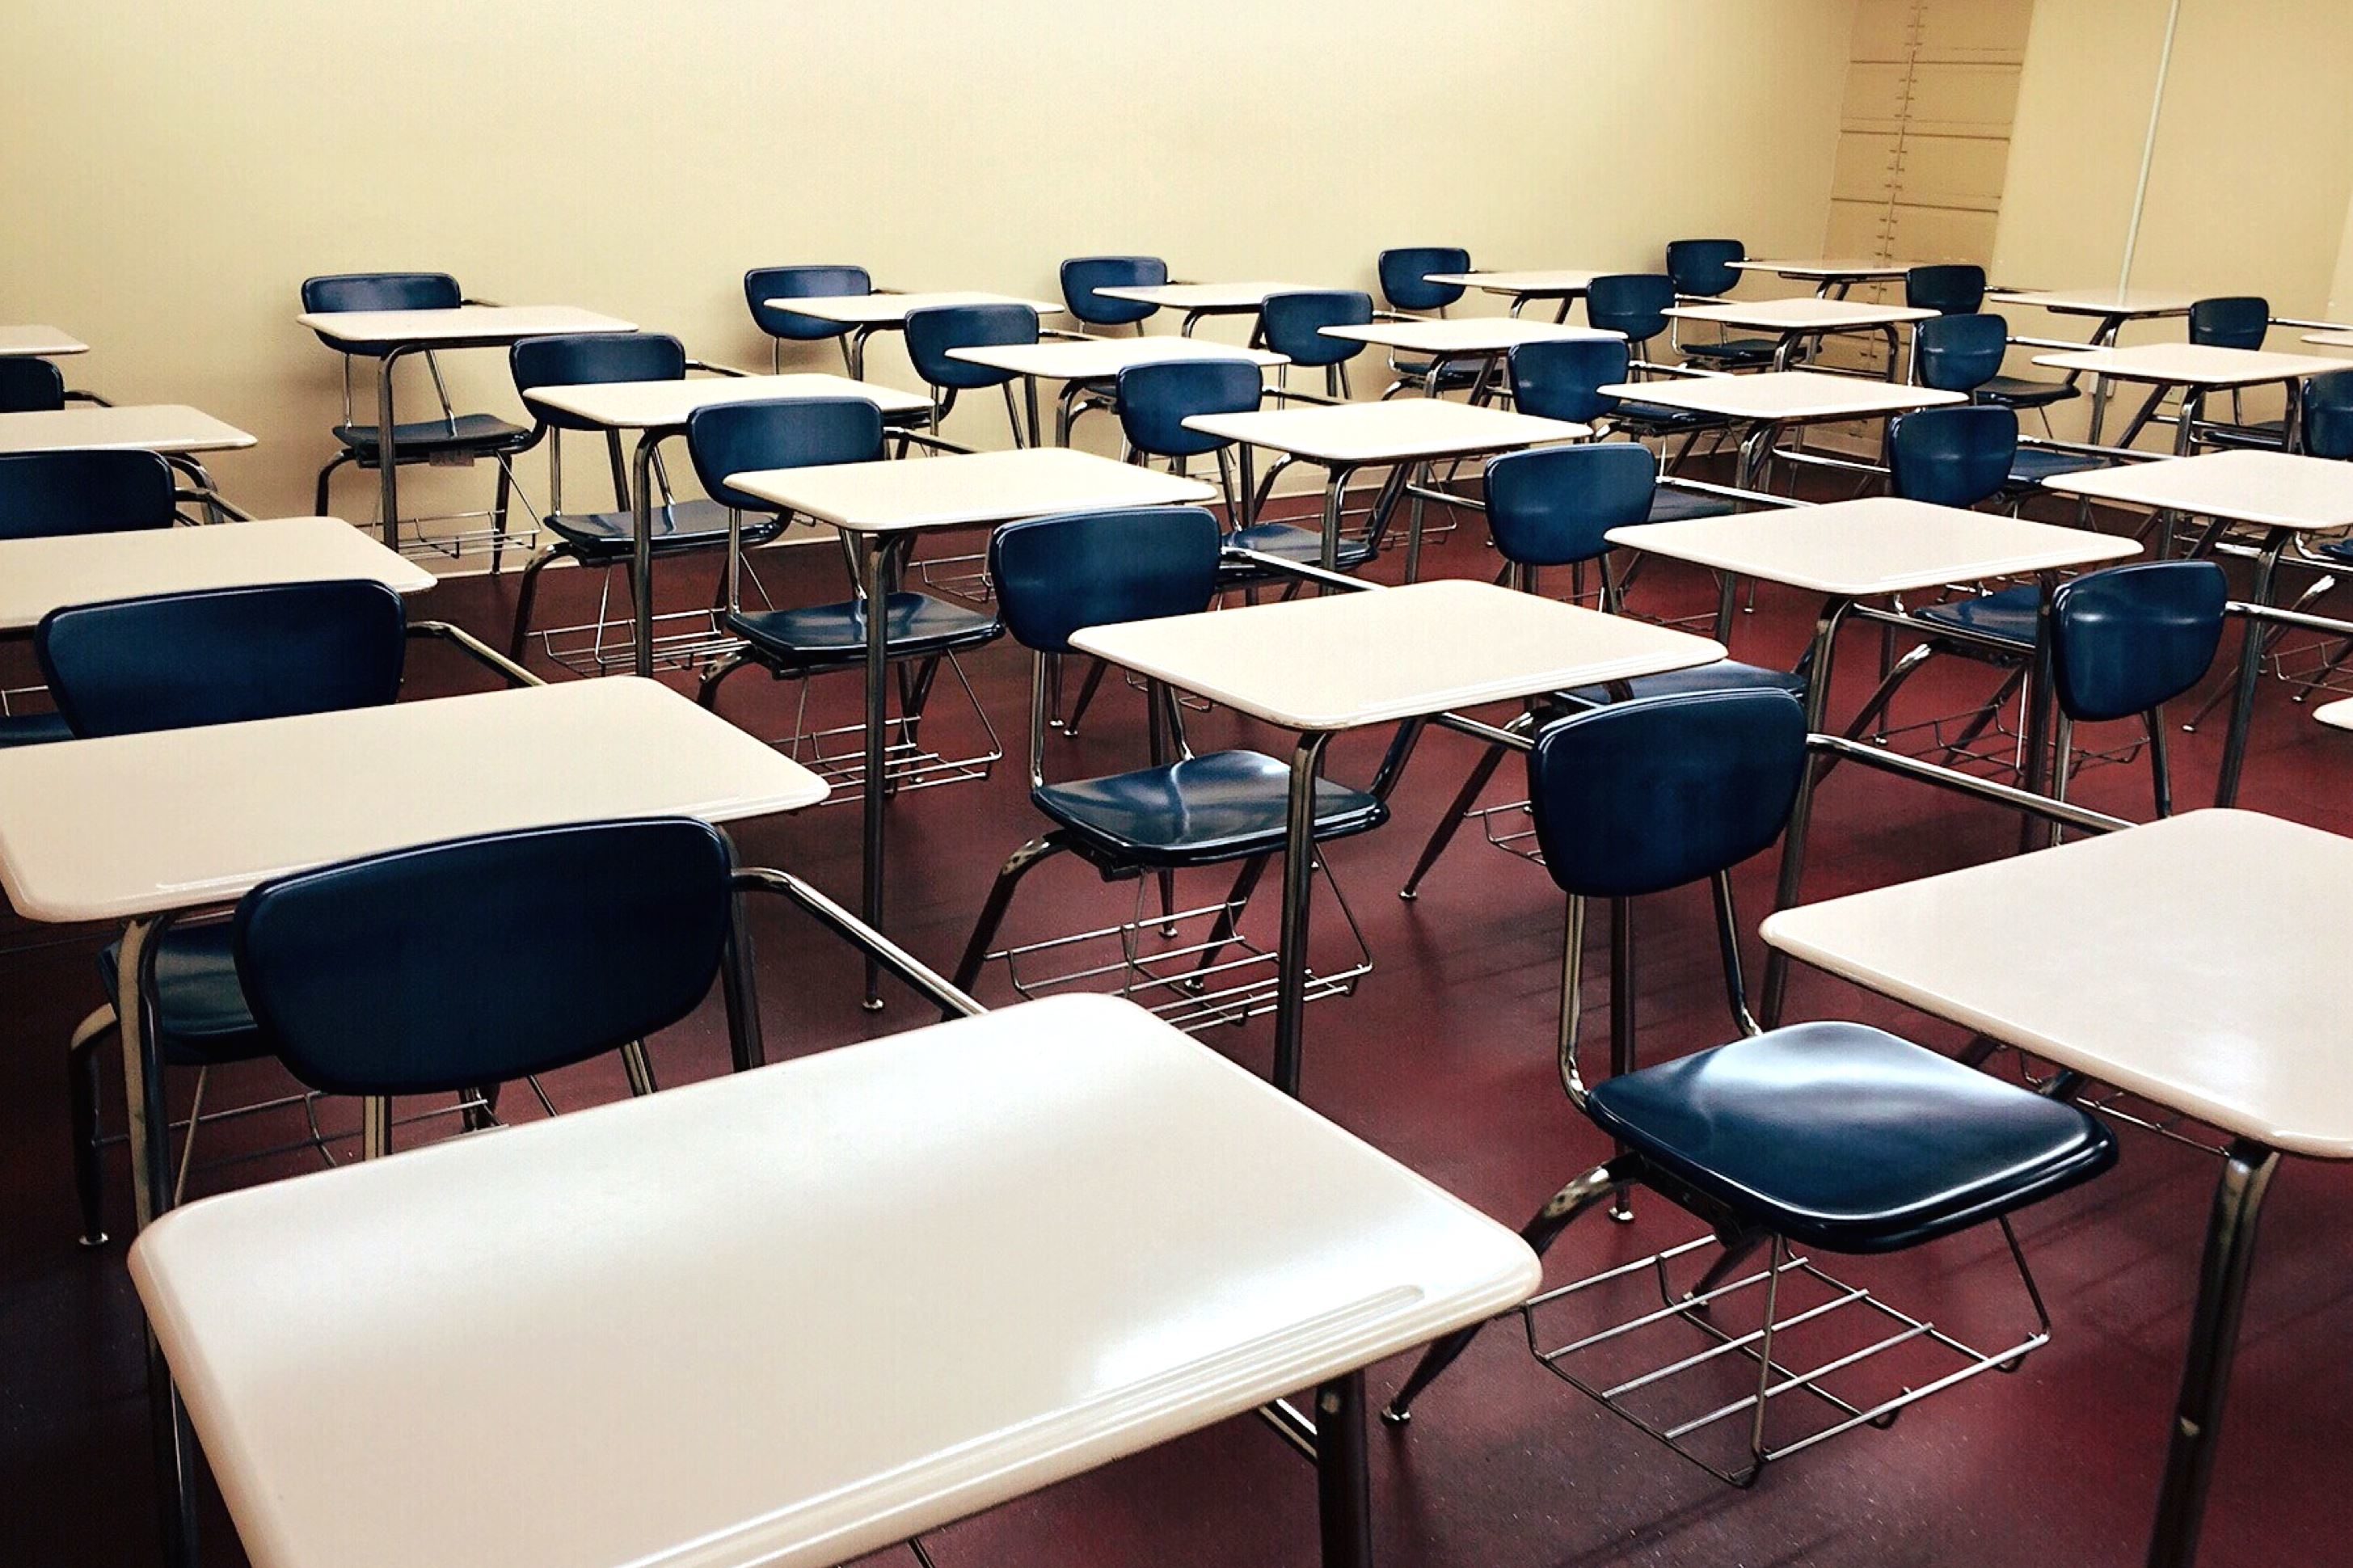 Free picture: room, rows, school, seat, chairs, classroom, college, desks